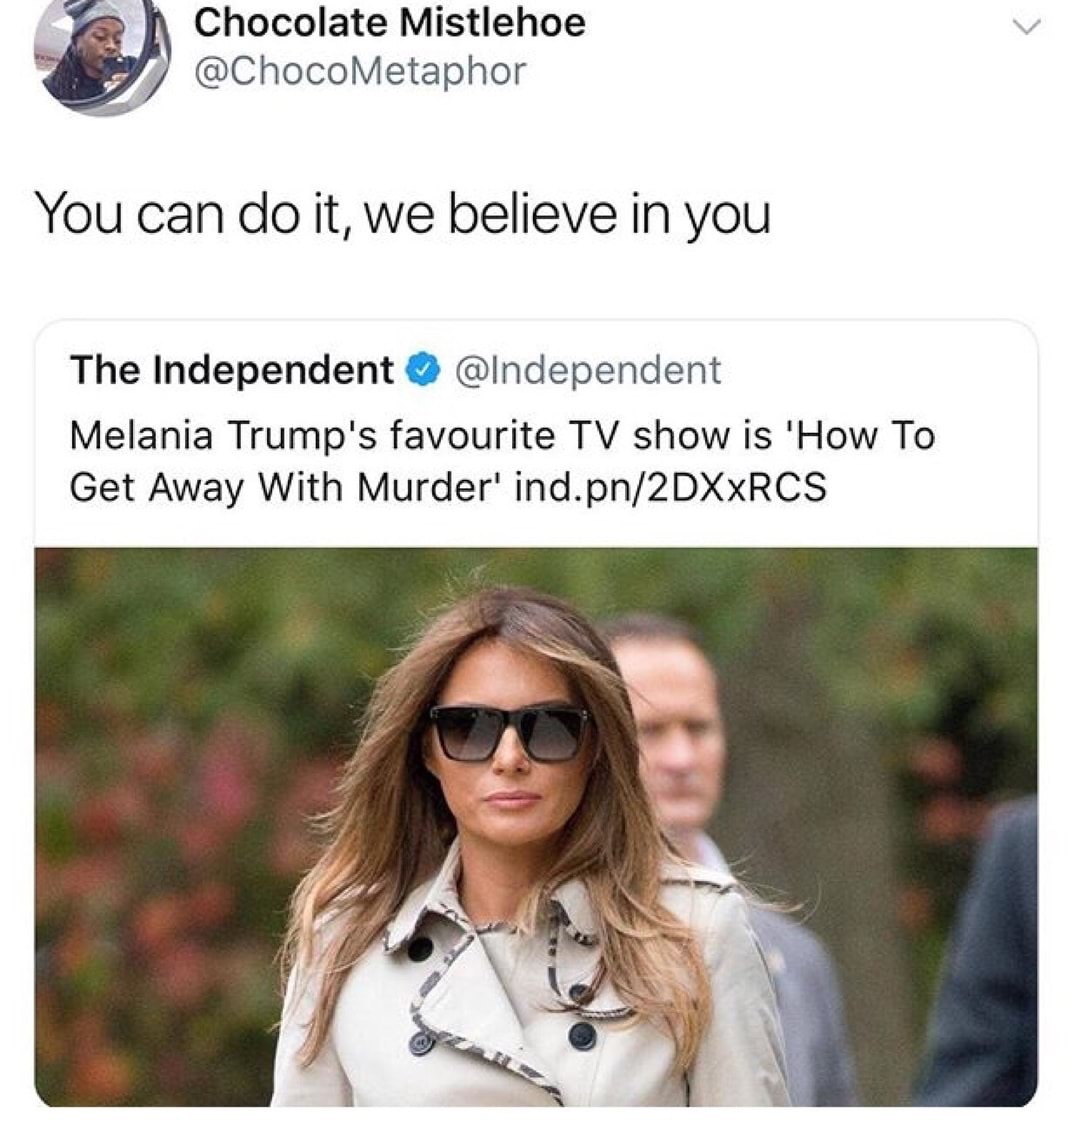 melania trump trench coat - Chocolate Mistlehoe Choco You can do it, we believe in you The Independent Melania Trump's favourite Tv show is 'How To Get Away With Murder' ind.pn2DXXRCS